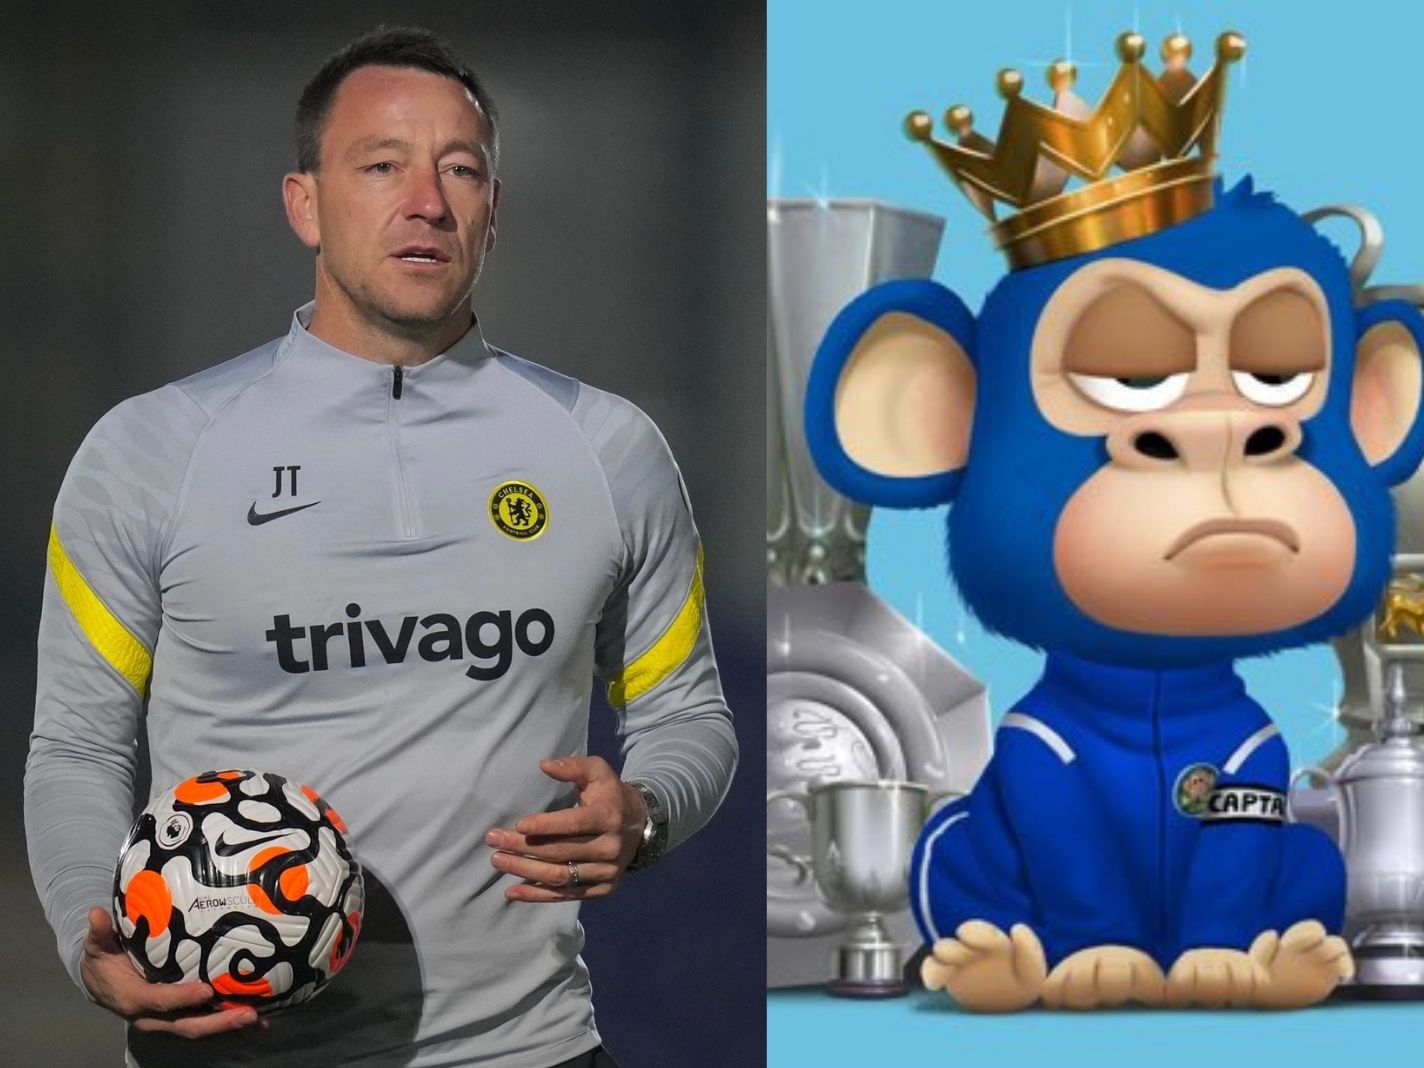 NFT supporter John Terry responds to Premier League rumours with snarky tweet